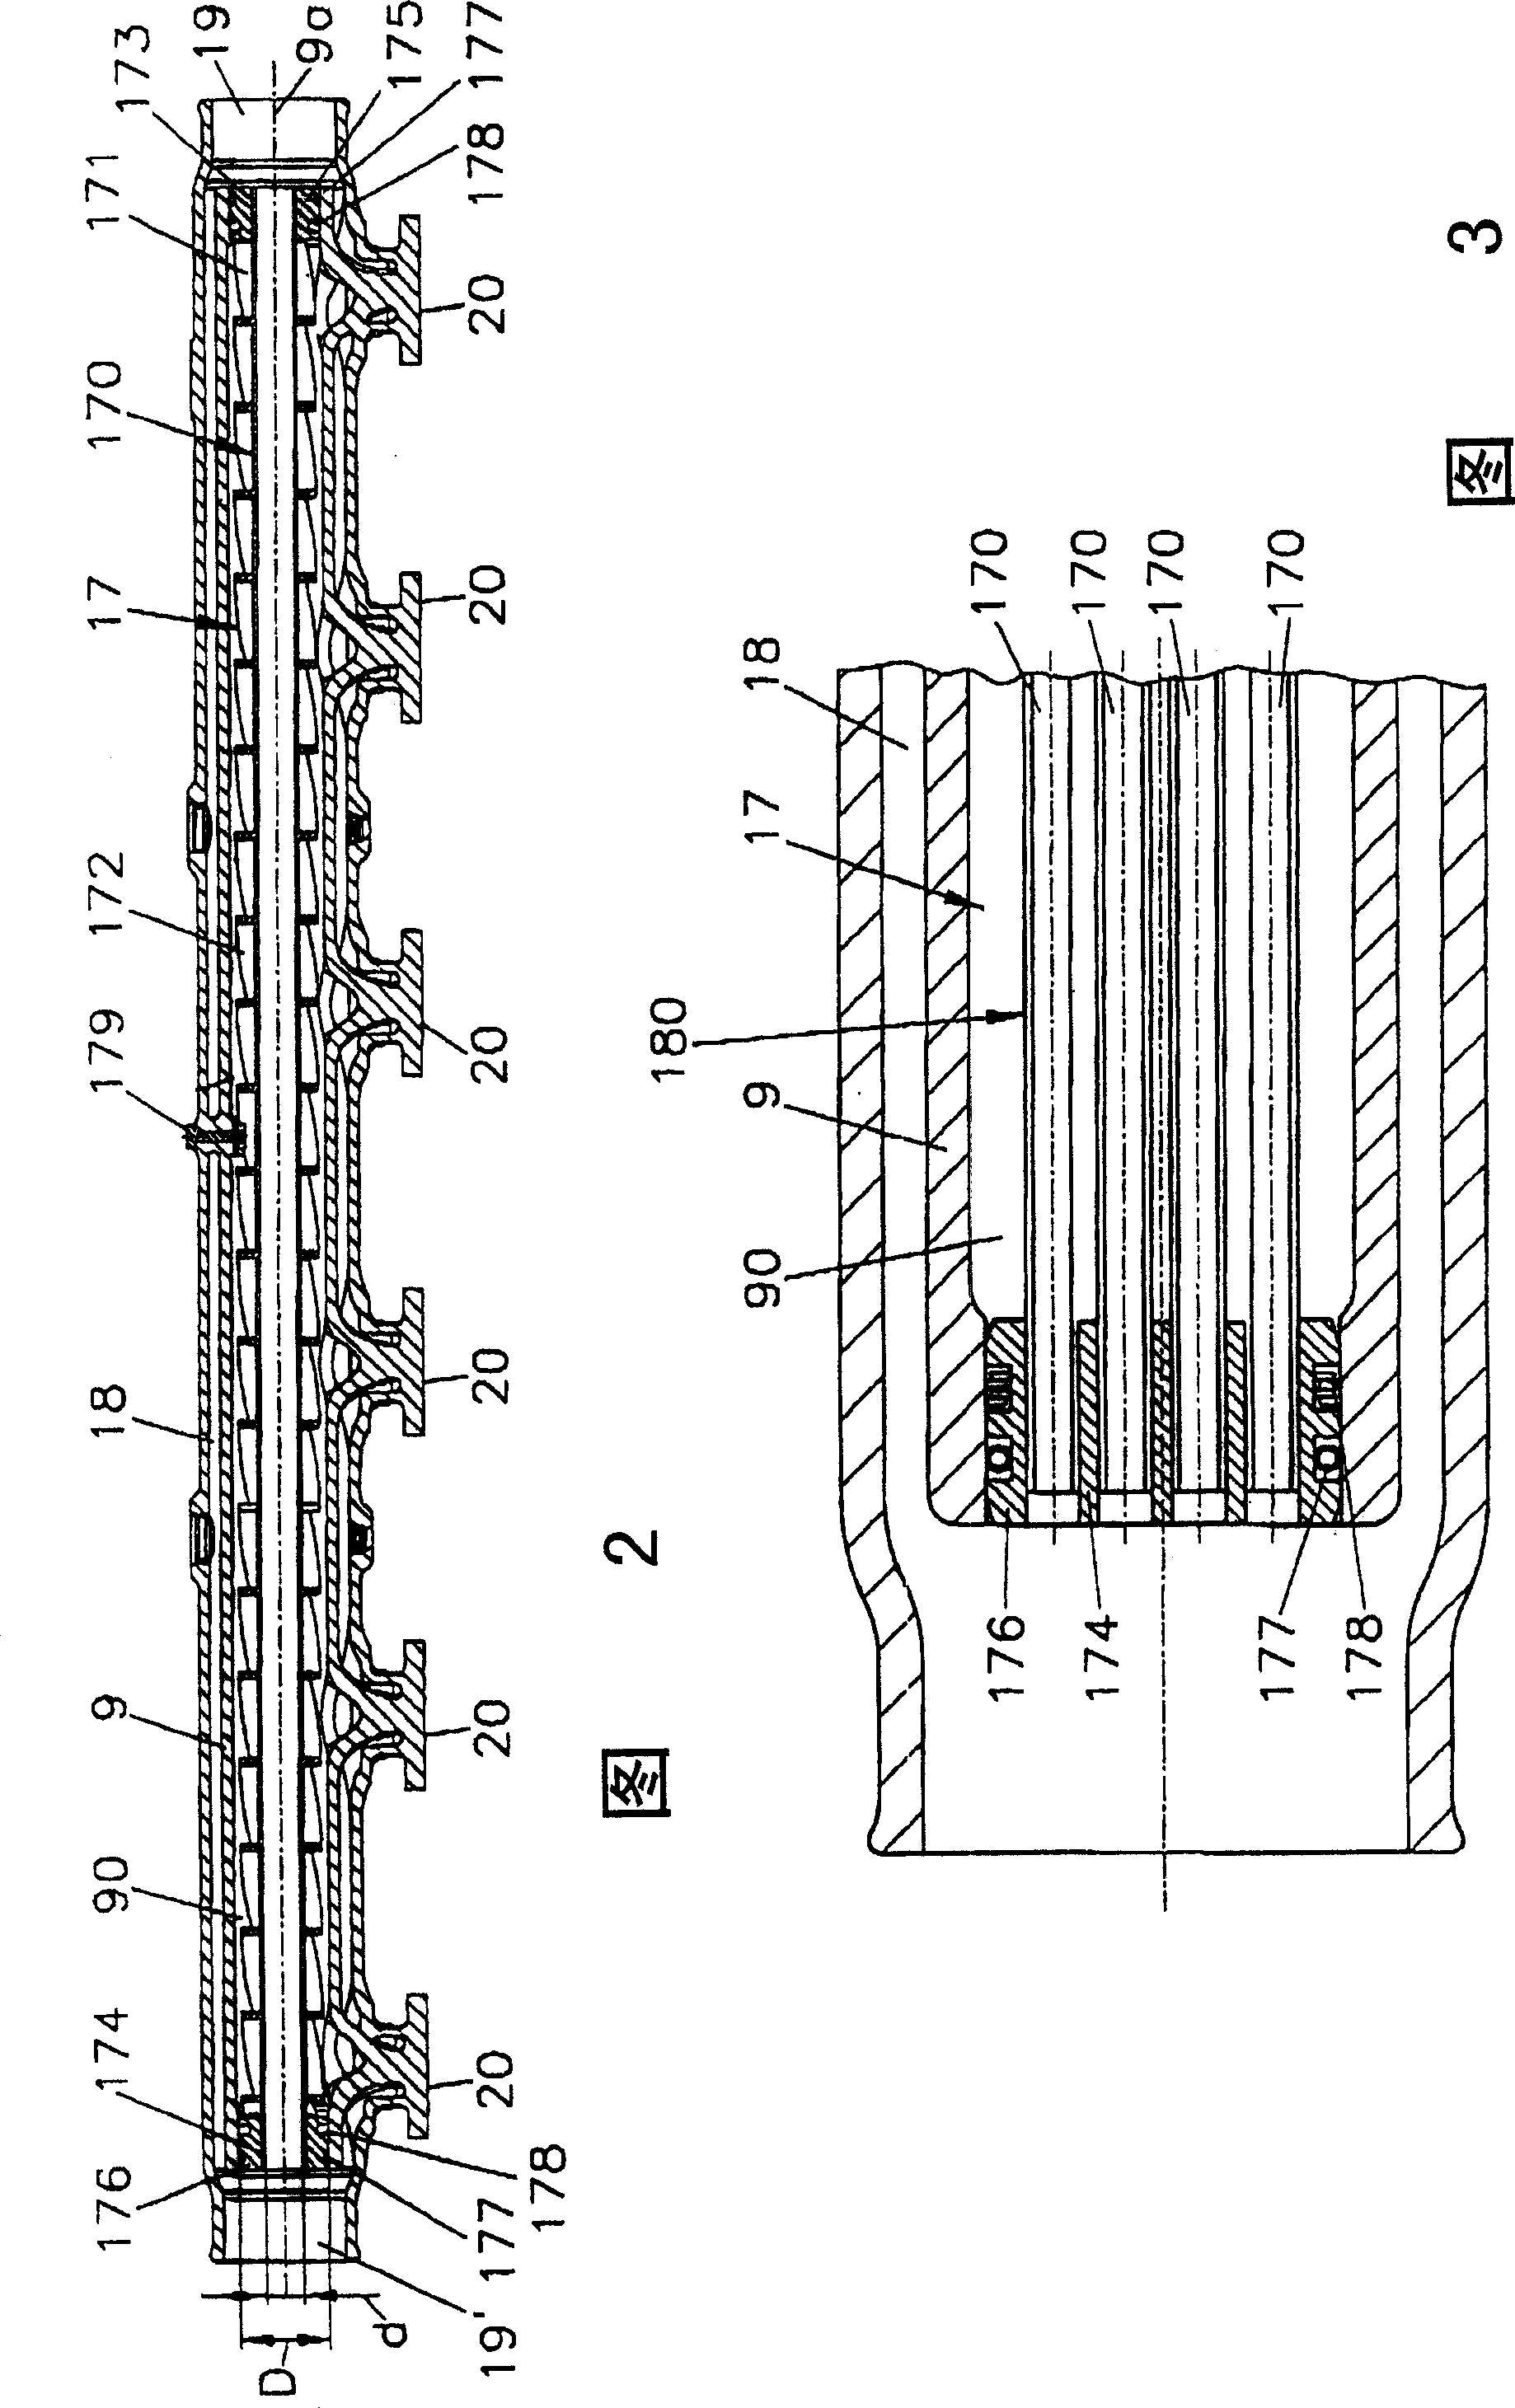 Method for operating internal combustion engine